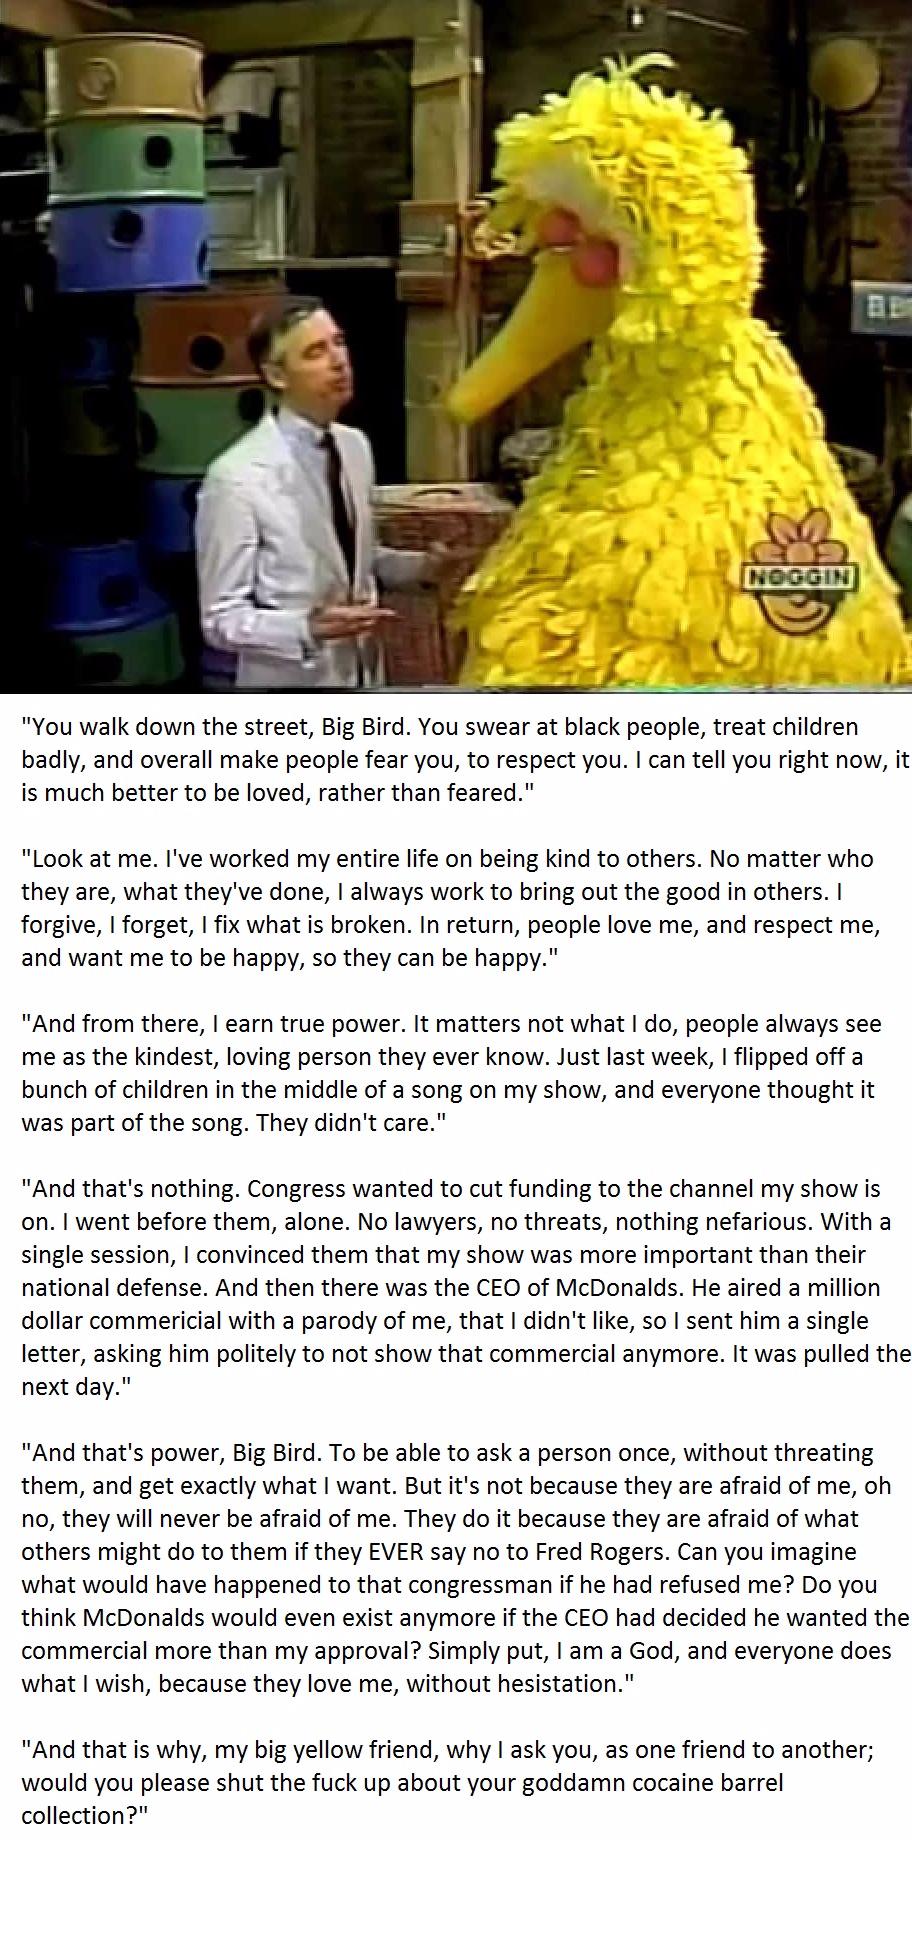 Fred Rogers educates Bird Bird on what REAL power is